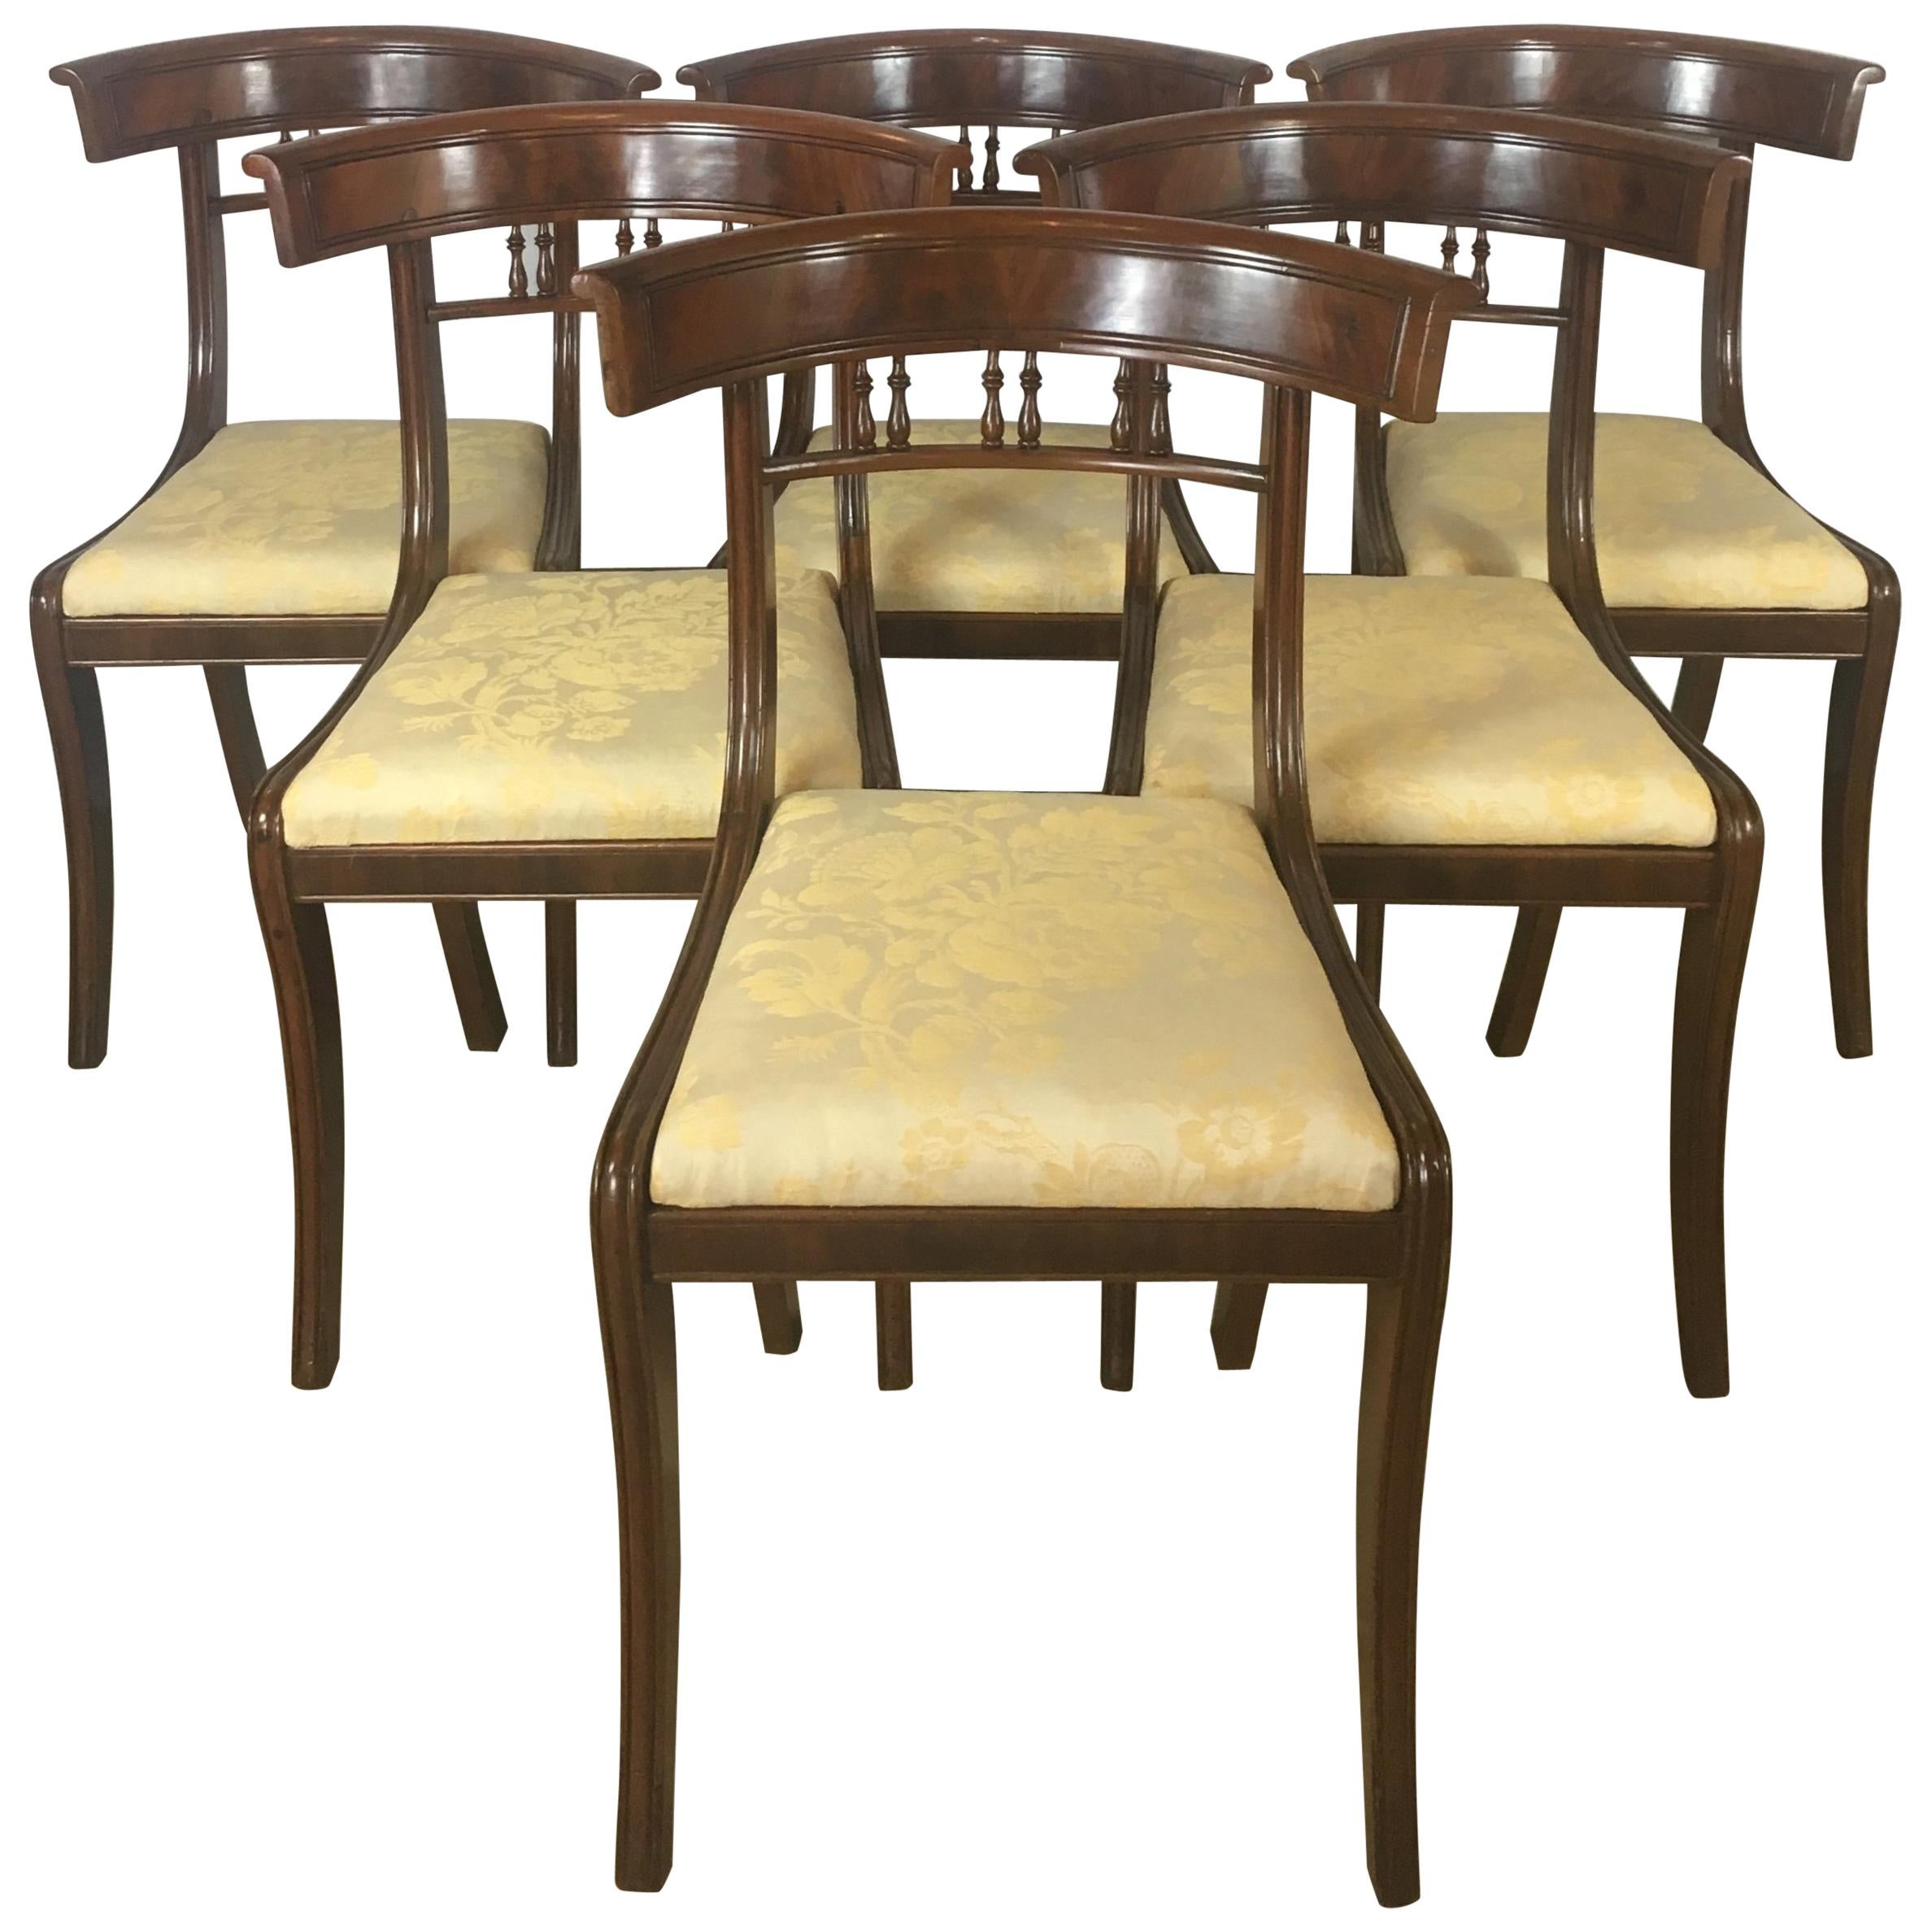 19th Century Regency Dining Chairs, Flame and Solid Mahogany Set of 6